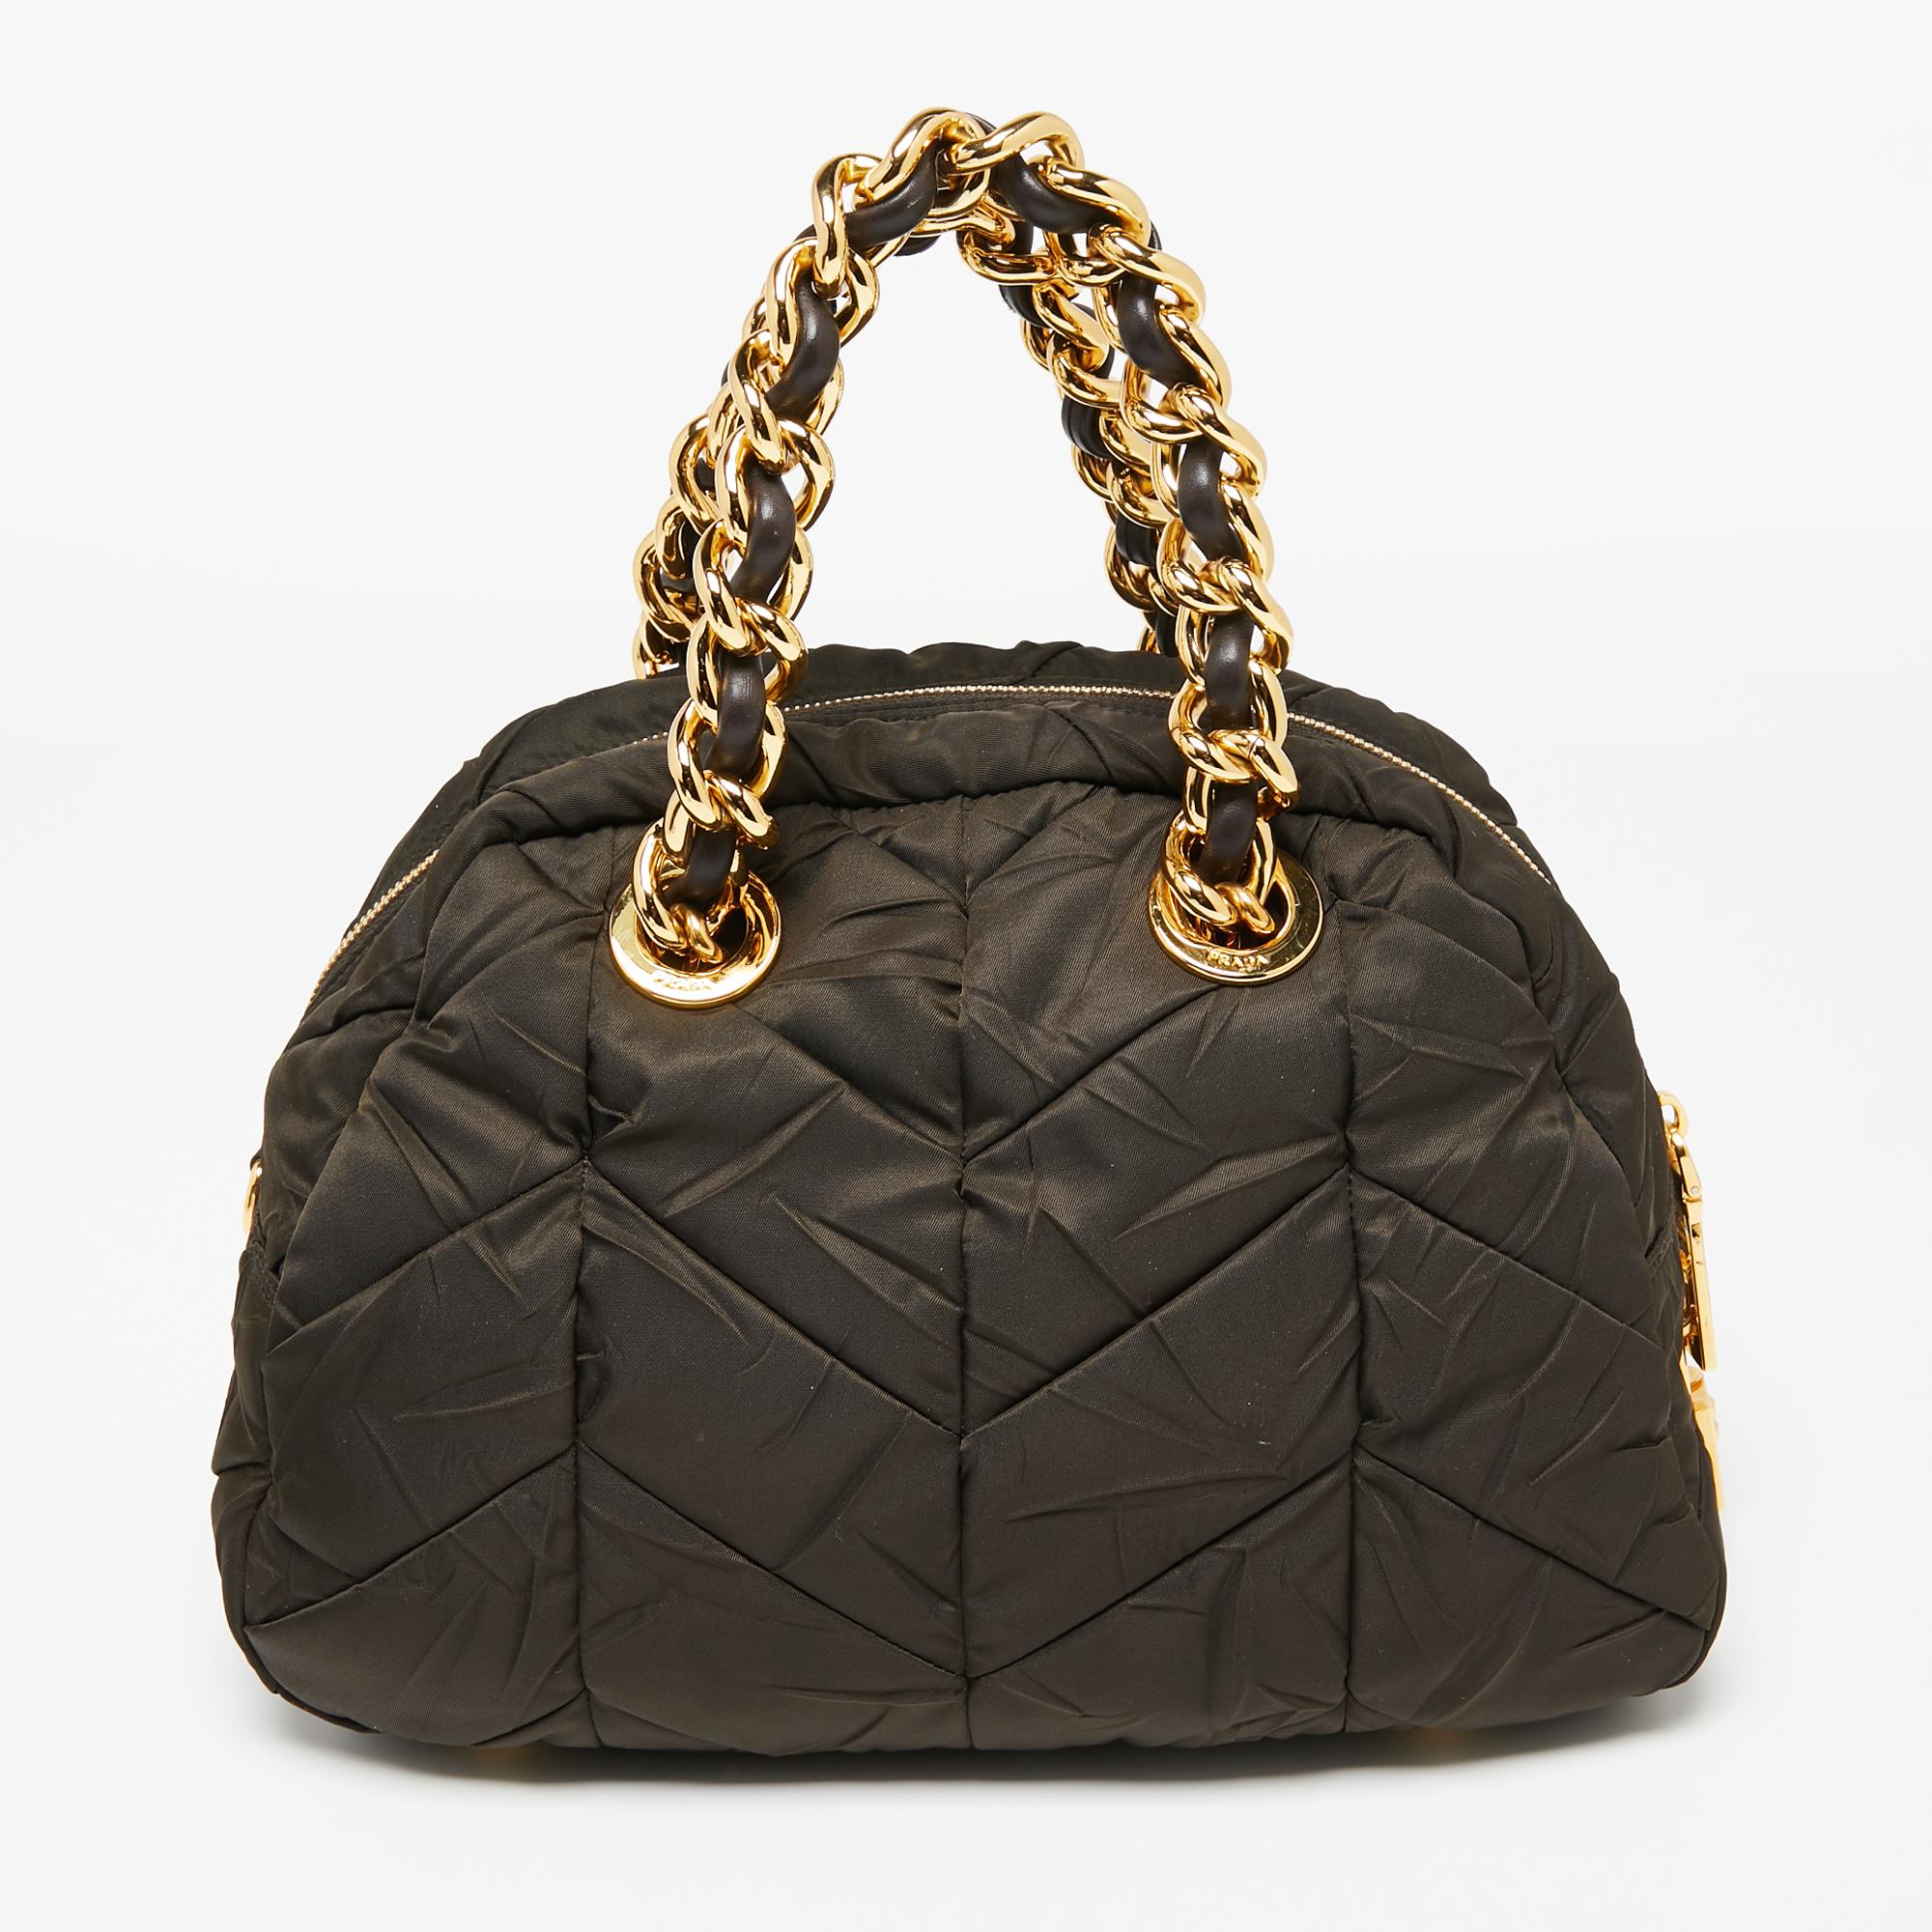 Stunning in appeal and high on style, this satchel from Prada is a must-have accessory! It is created using moss-green quilted nylon. It exhibits dual chain-embellished handles, gold-tone hardware, and a roomy nylon-lined interior. Elevate your